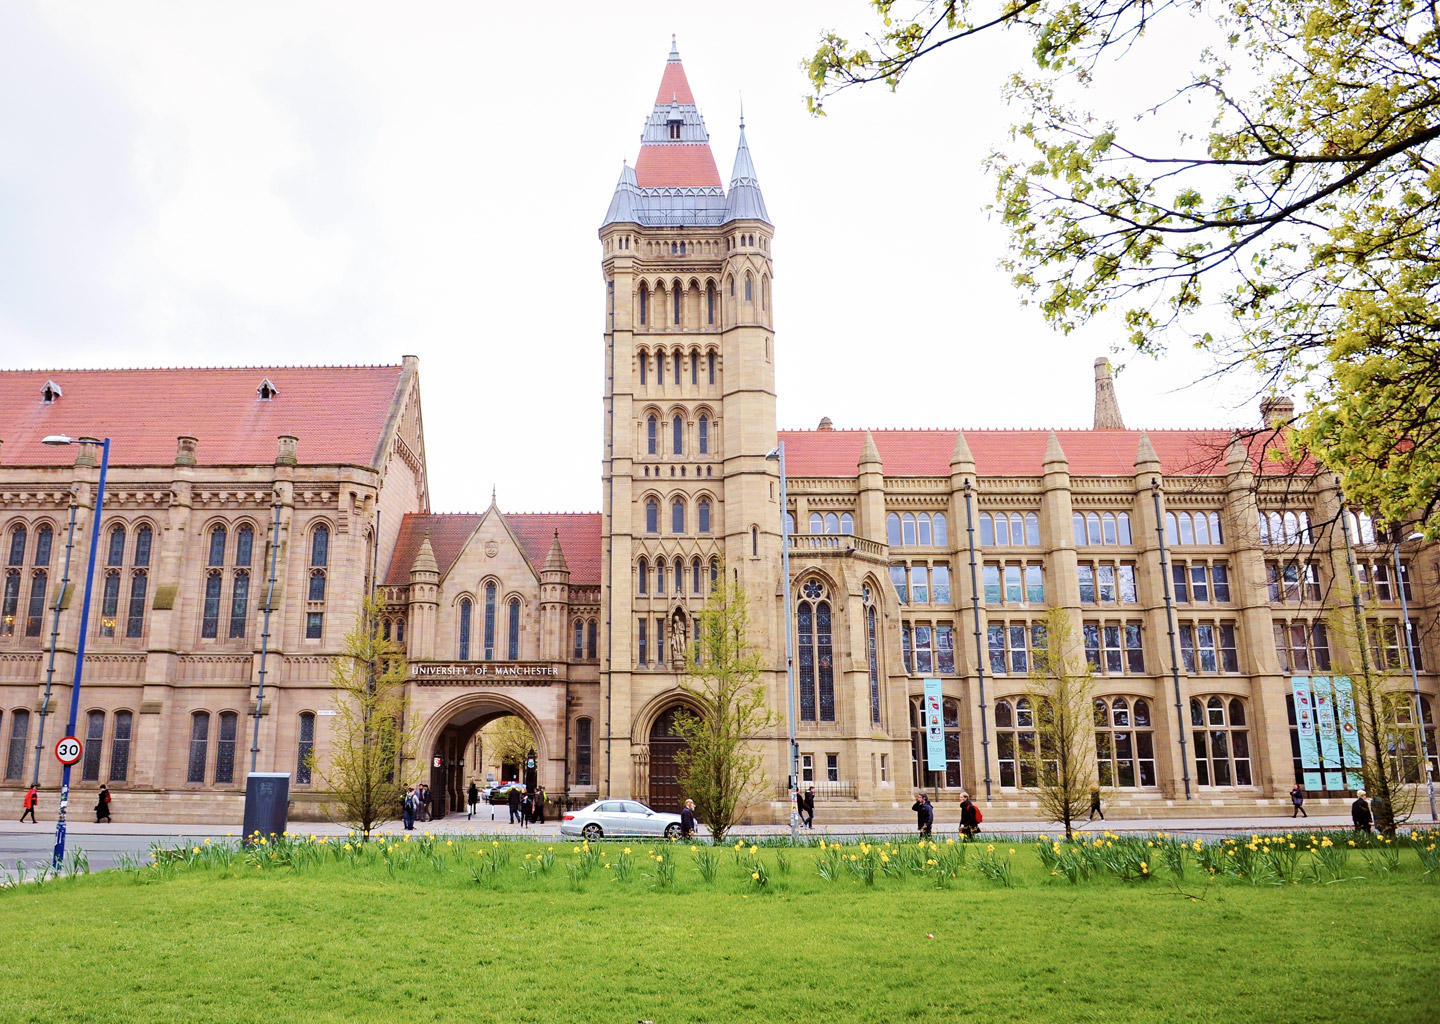 University of Manchester, Universities in the UK for courses in Education